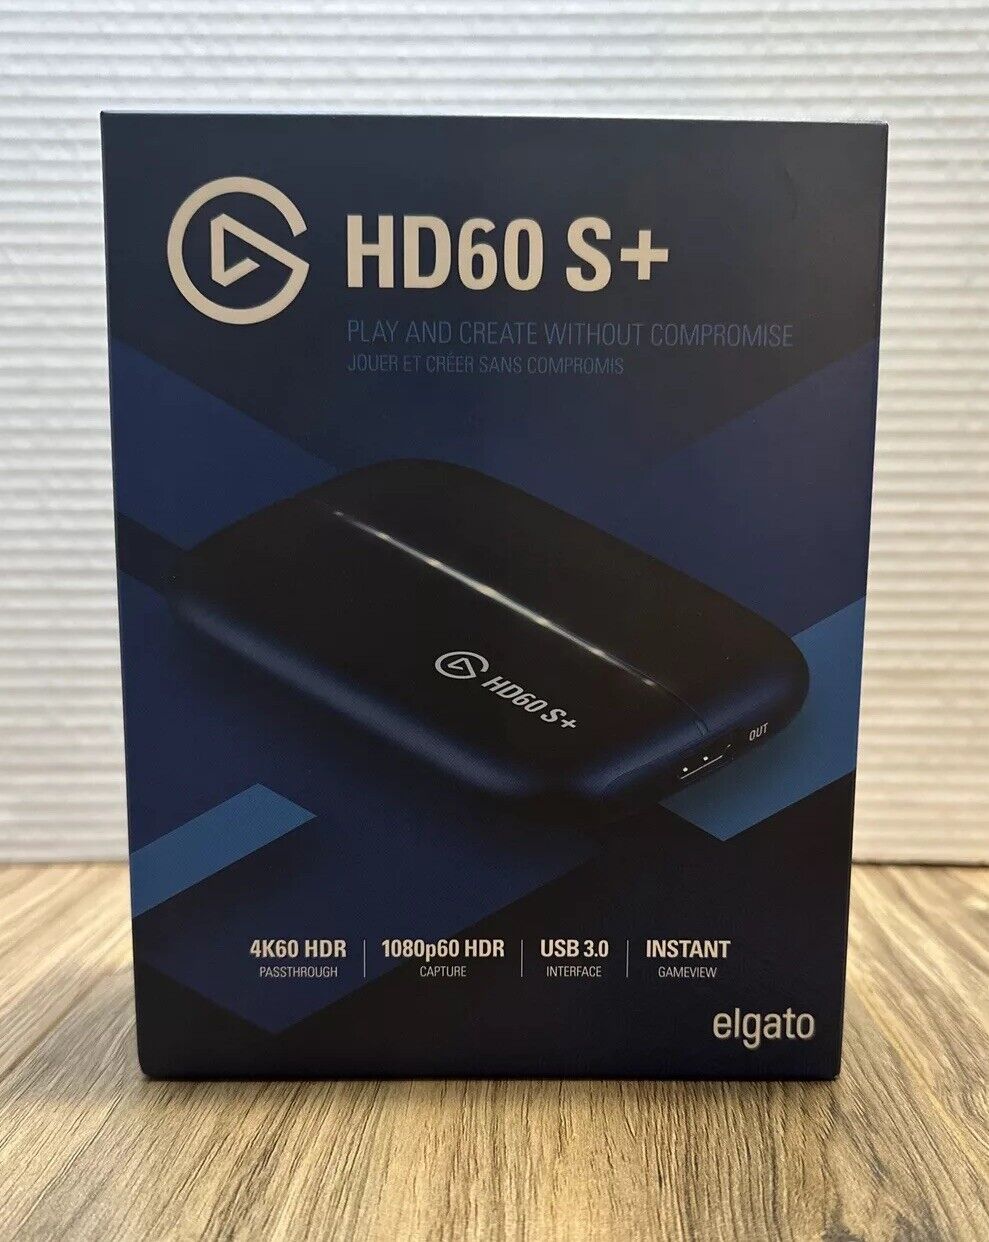 Elgato HD60 S + External Capture Card, Stream, And Record.